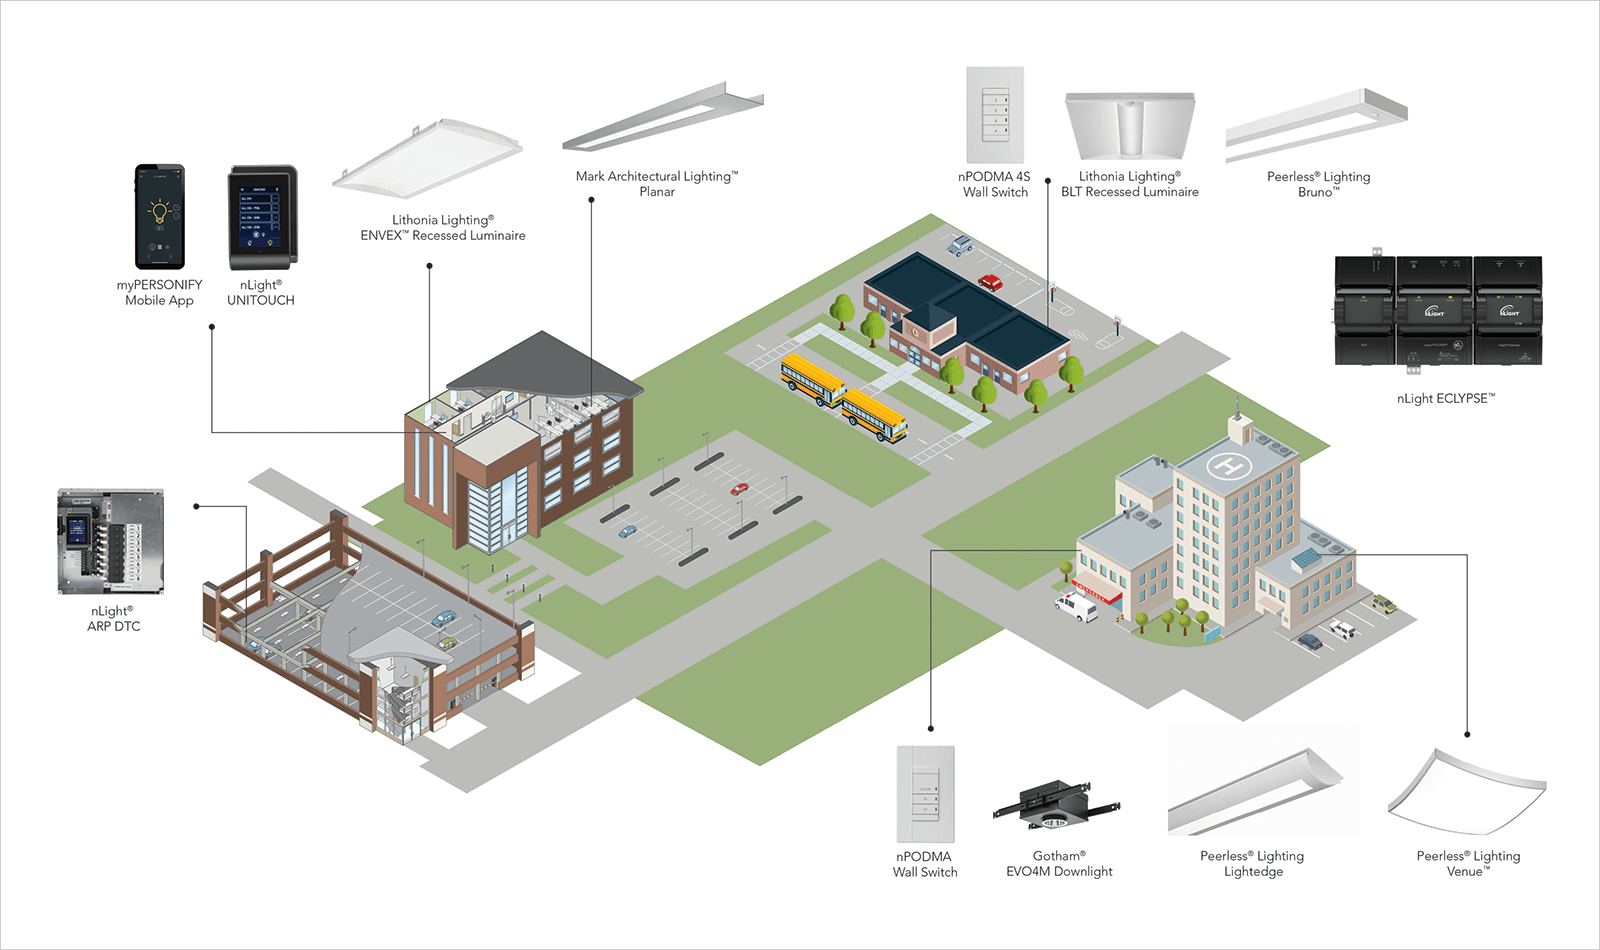 A drawing illustrates how nLight wired lighting controls can be used in a variety of buildings, including parking decks, school buildings, and hospitals.